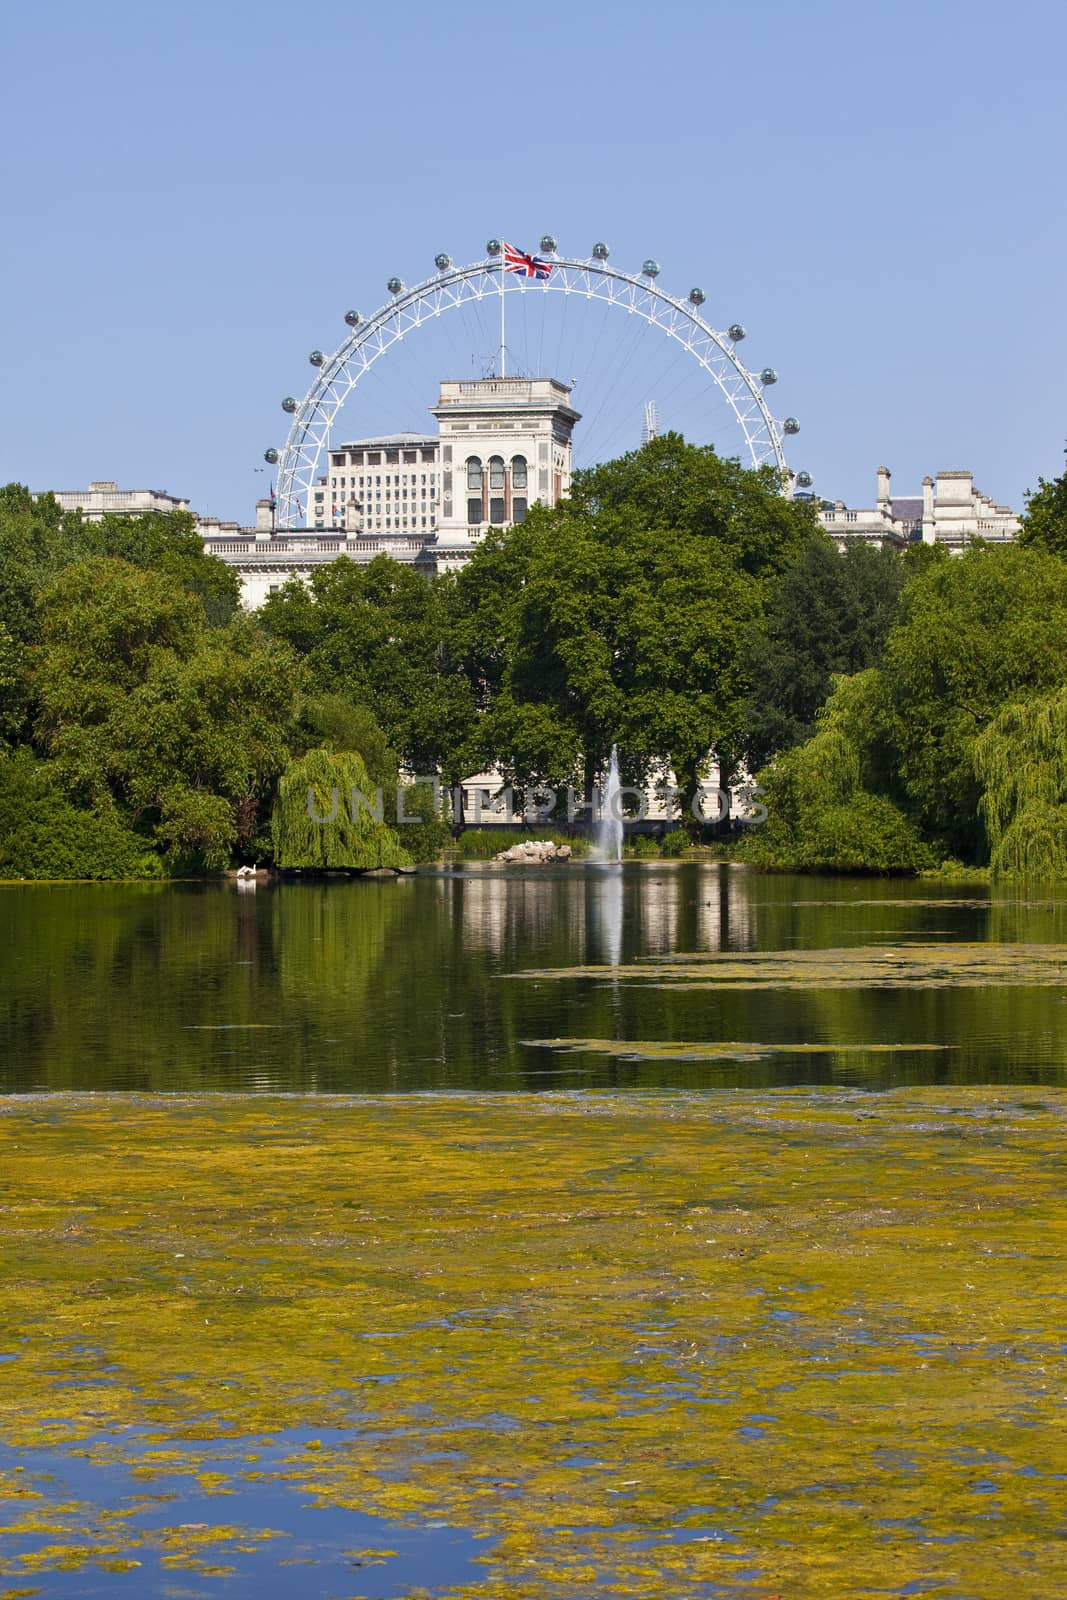 The beautiful view from St. James's Park in London.